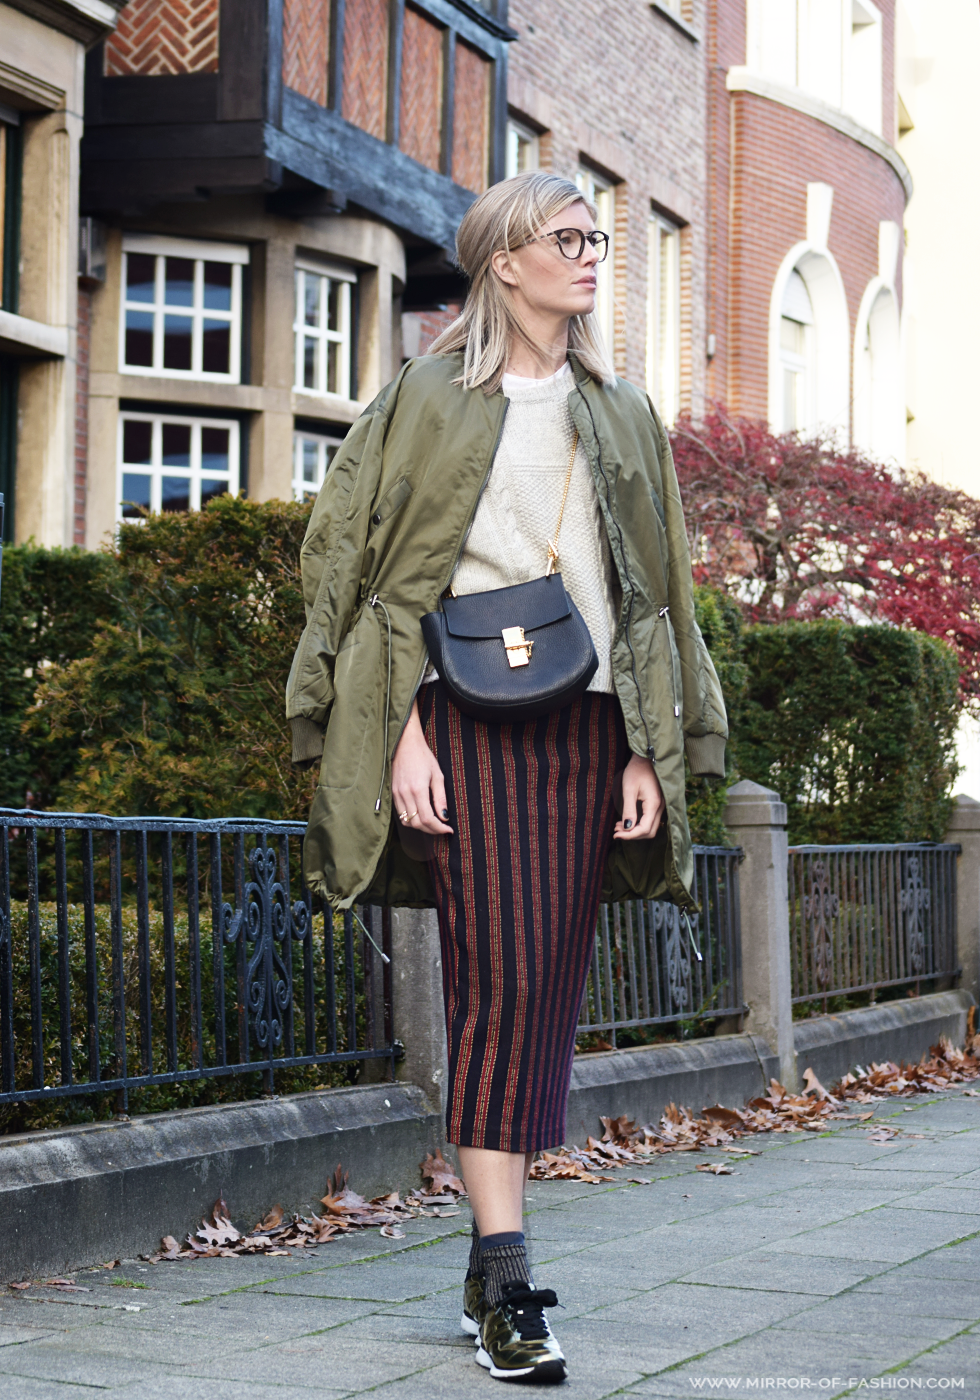 Dewolf, Marc by Marc Jacobs, Dondup, Hogan, Mia Zia, Pinko, Cartier, Chloé, spell on me, ootd, style, fashion, blog